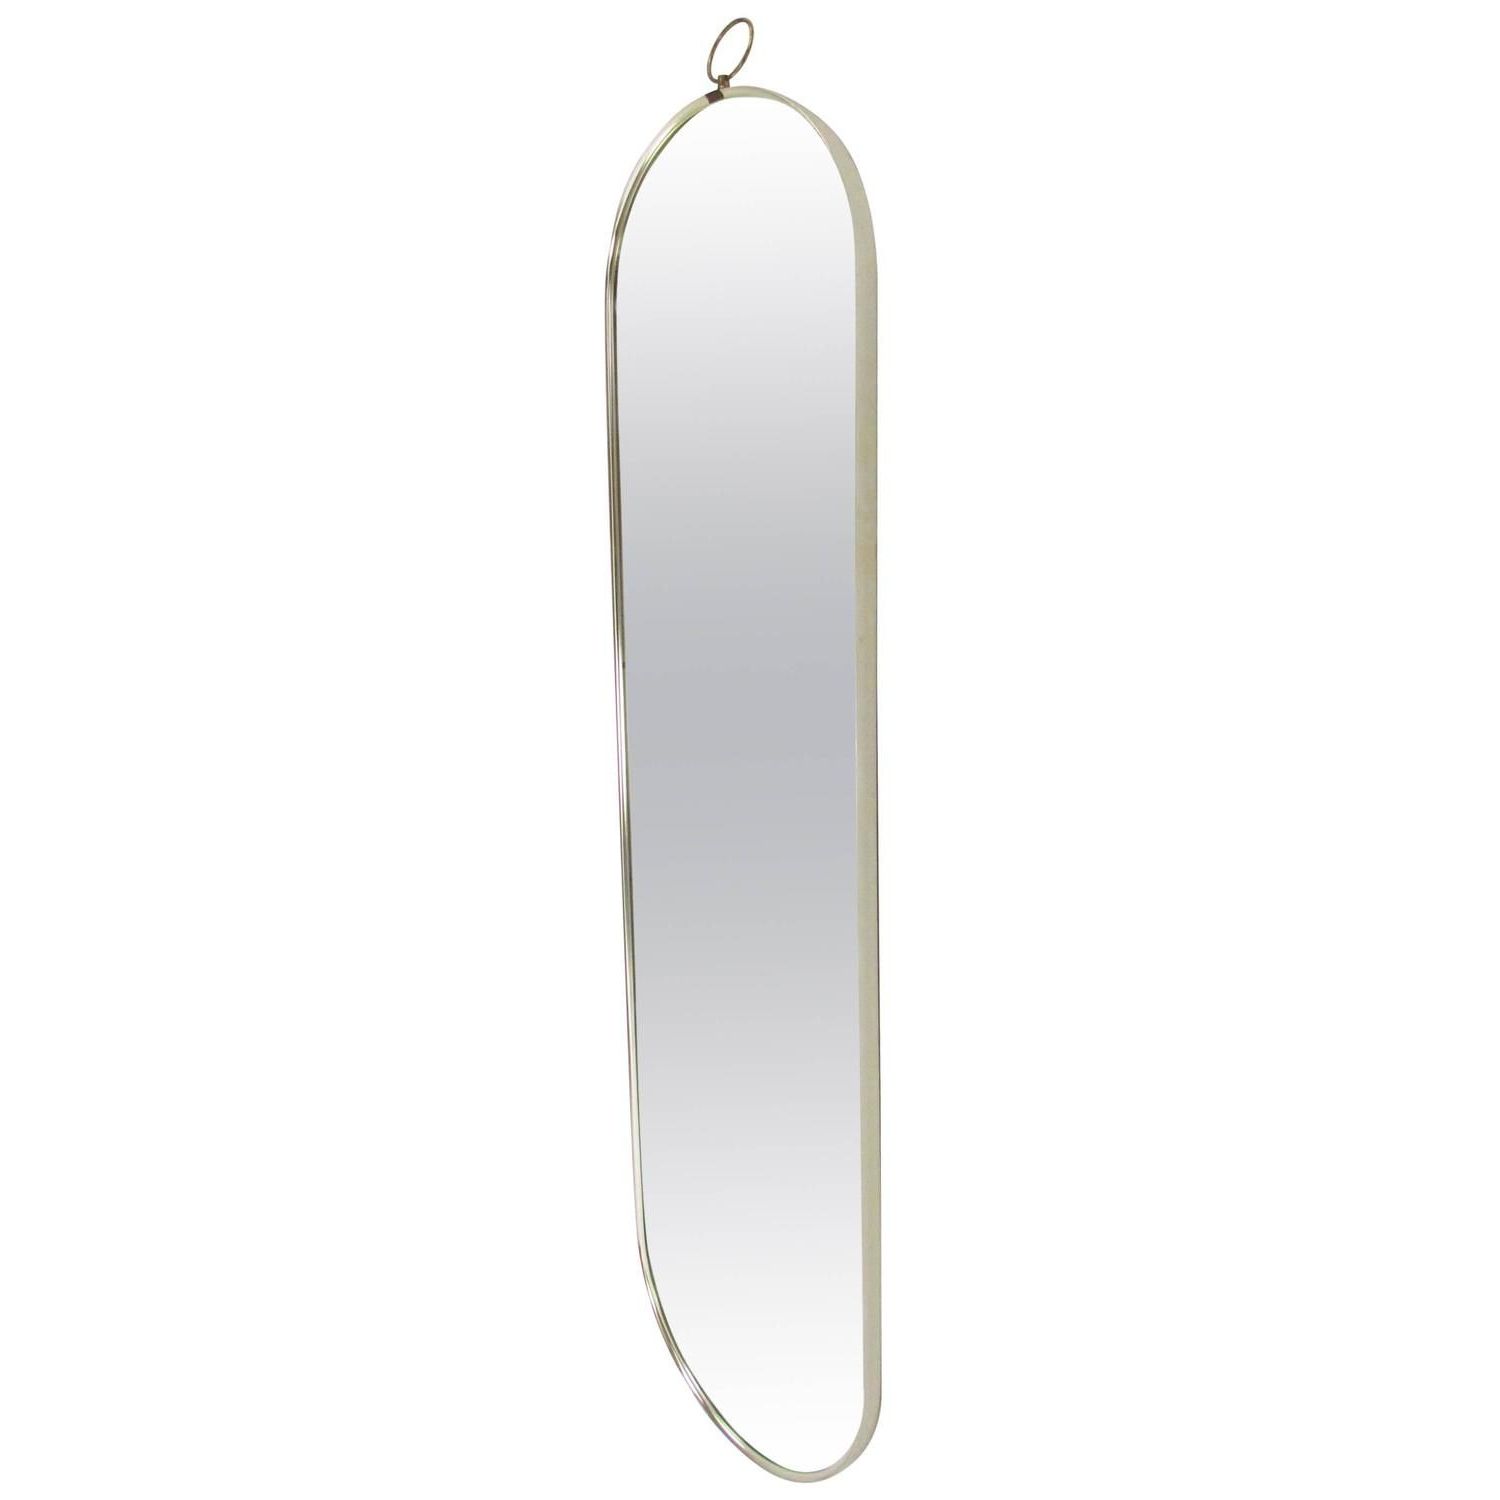 2019 Full Length Oval Wall Mirrors Throughout Italian Modernist Full Length Oval Wall Mirror, Circa 1960s (Photo 1 of 20)